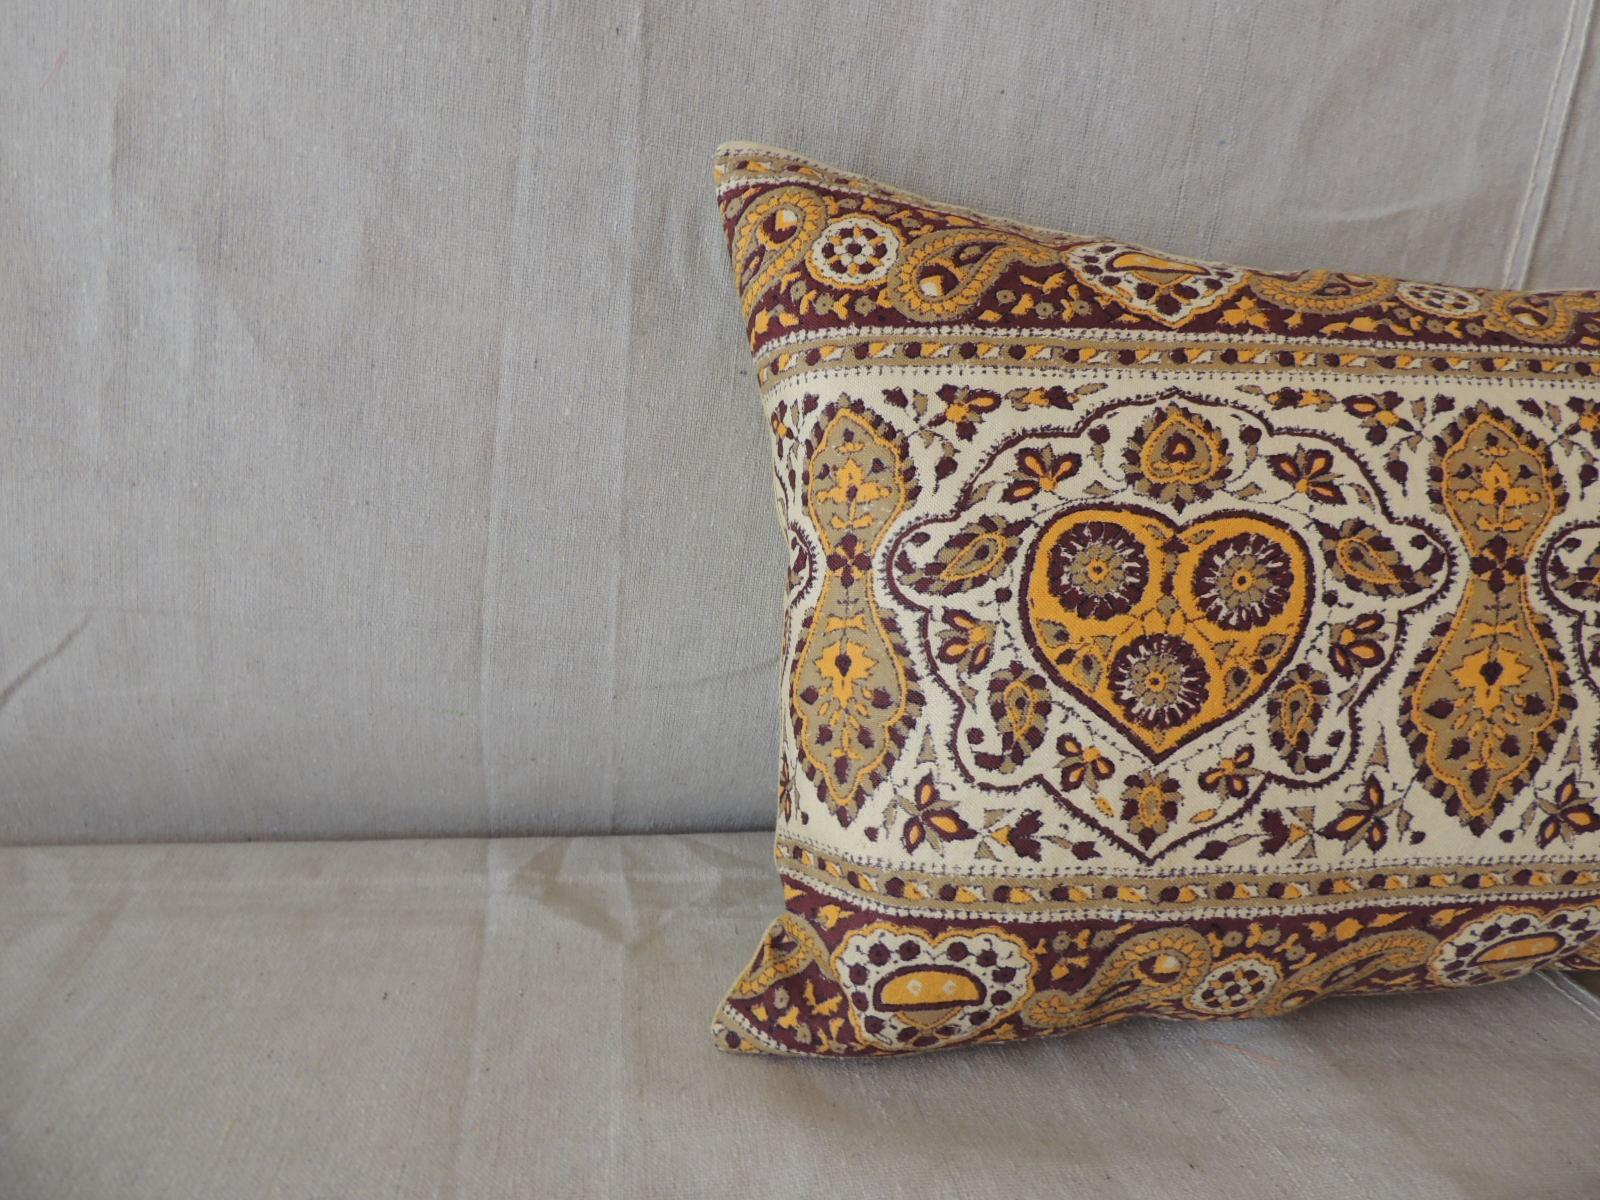 Vintage hand-blocked kalamkari long bolster decorative pillow.
Camel color textured linen backing.
Floral pattern (seam in the middle) In shades of red, blue, pink and camel.
Soft yellow cotton backings.
Handcrafted and designed in the